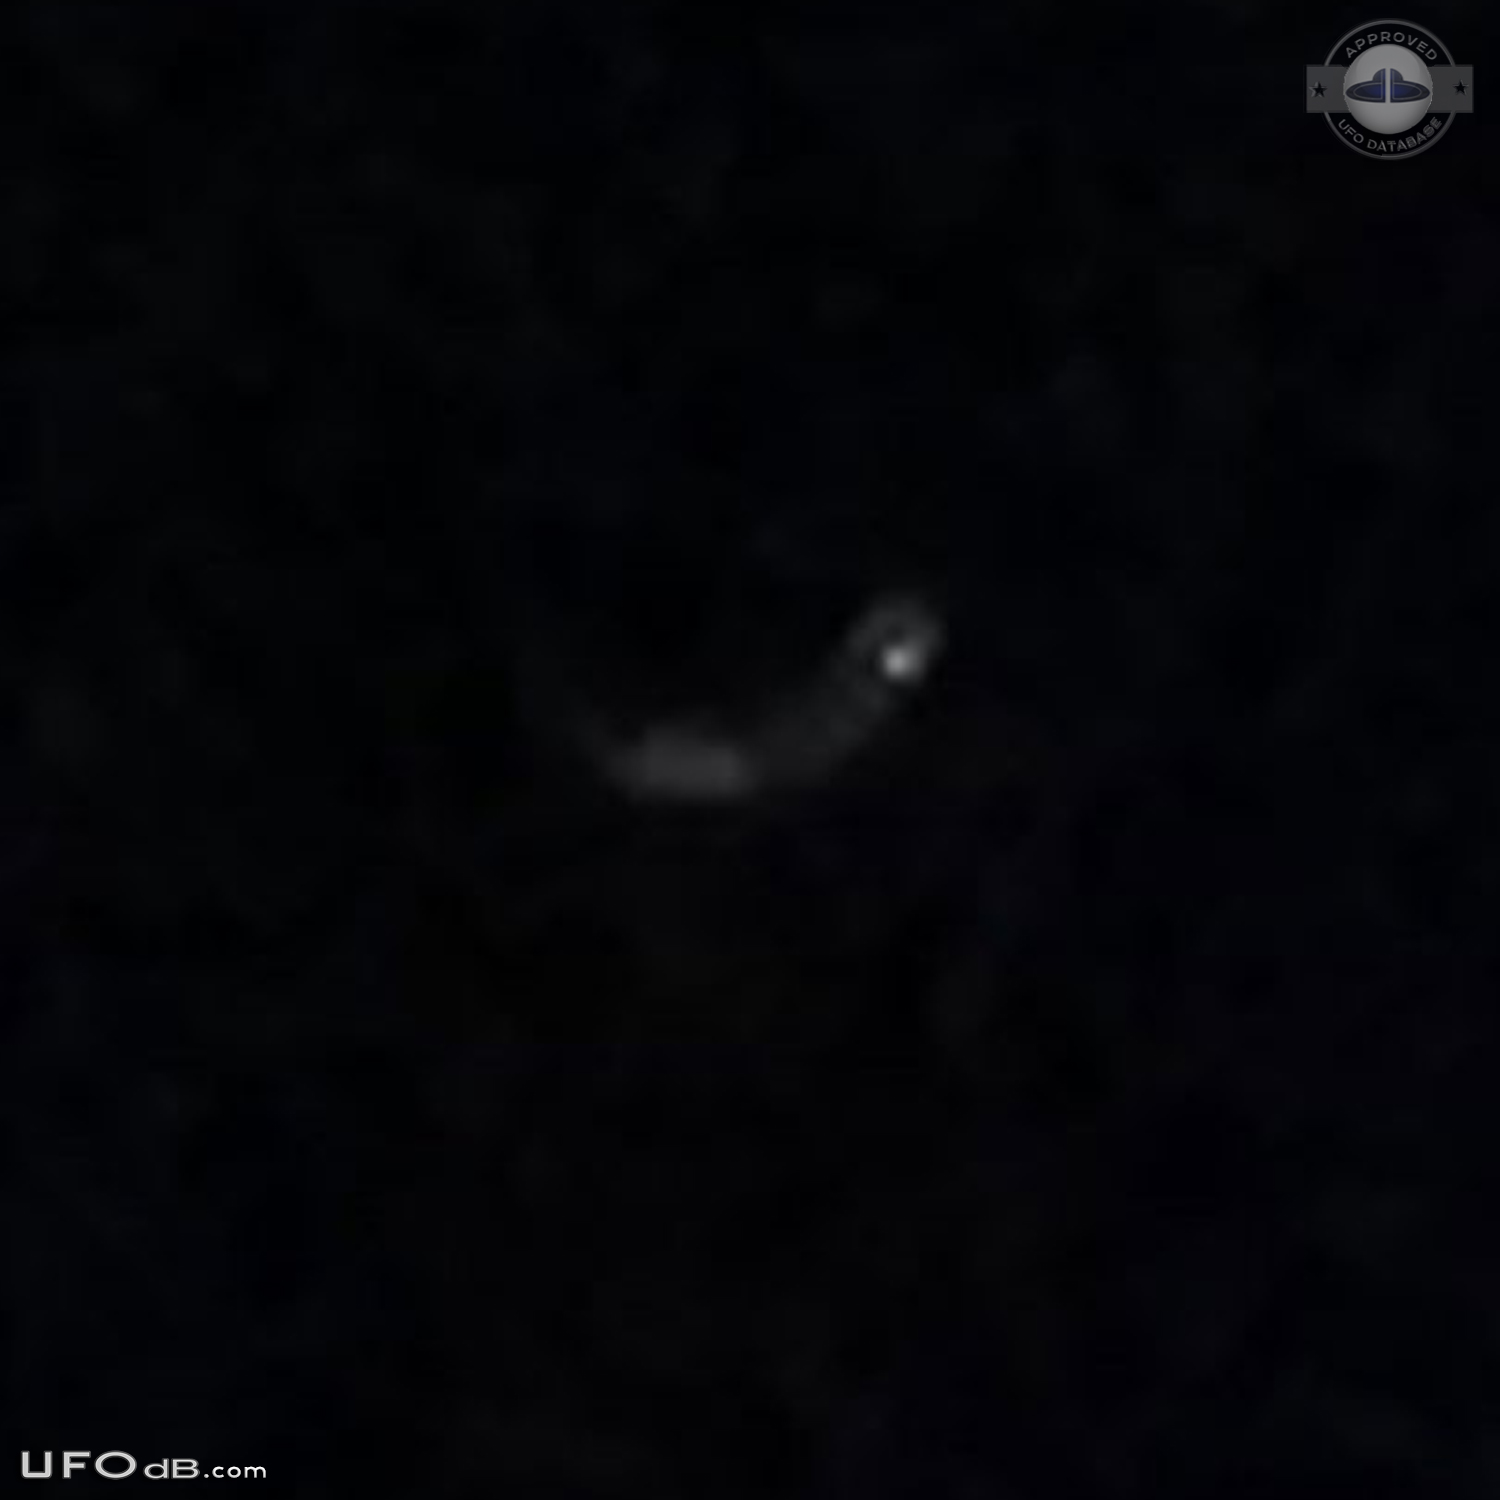 UFO with tentacles with reddish color seen over Magee, Mississipi 2014 UFO Picture #561-3